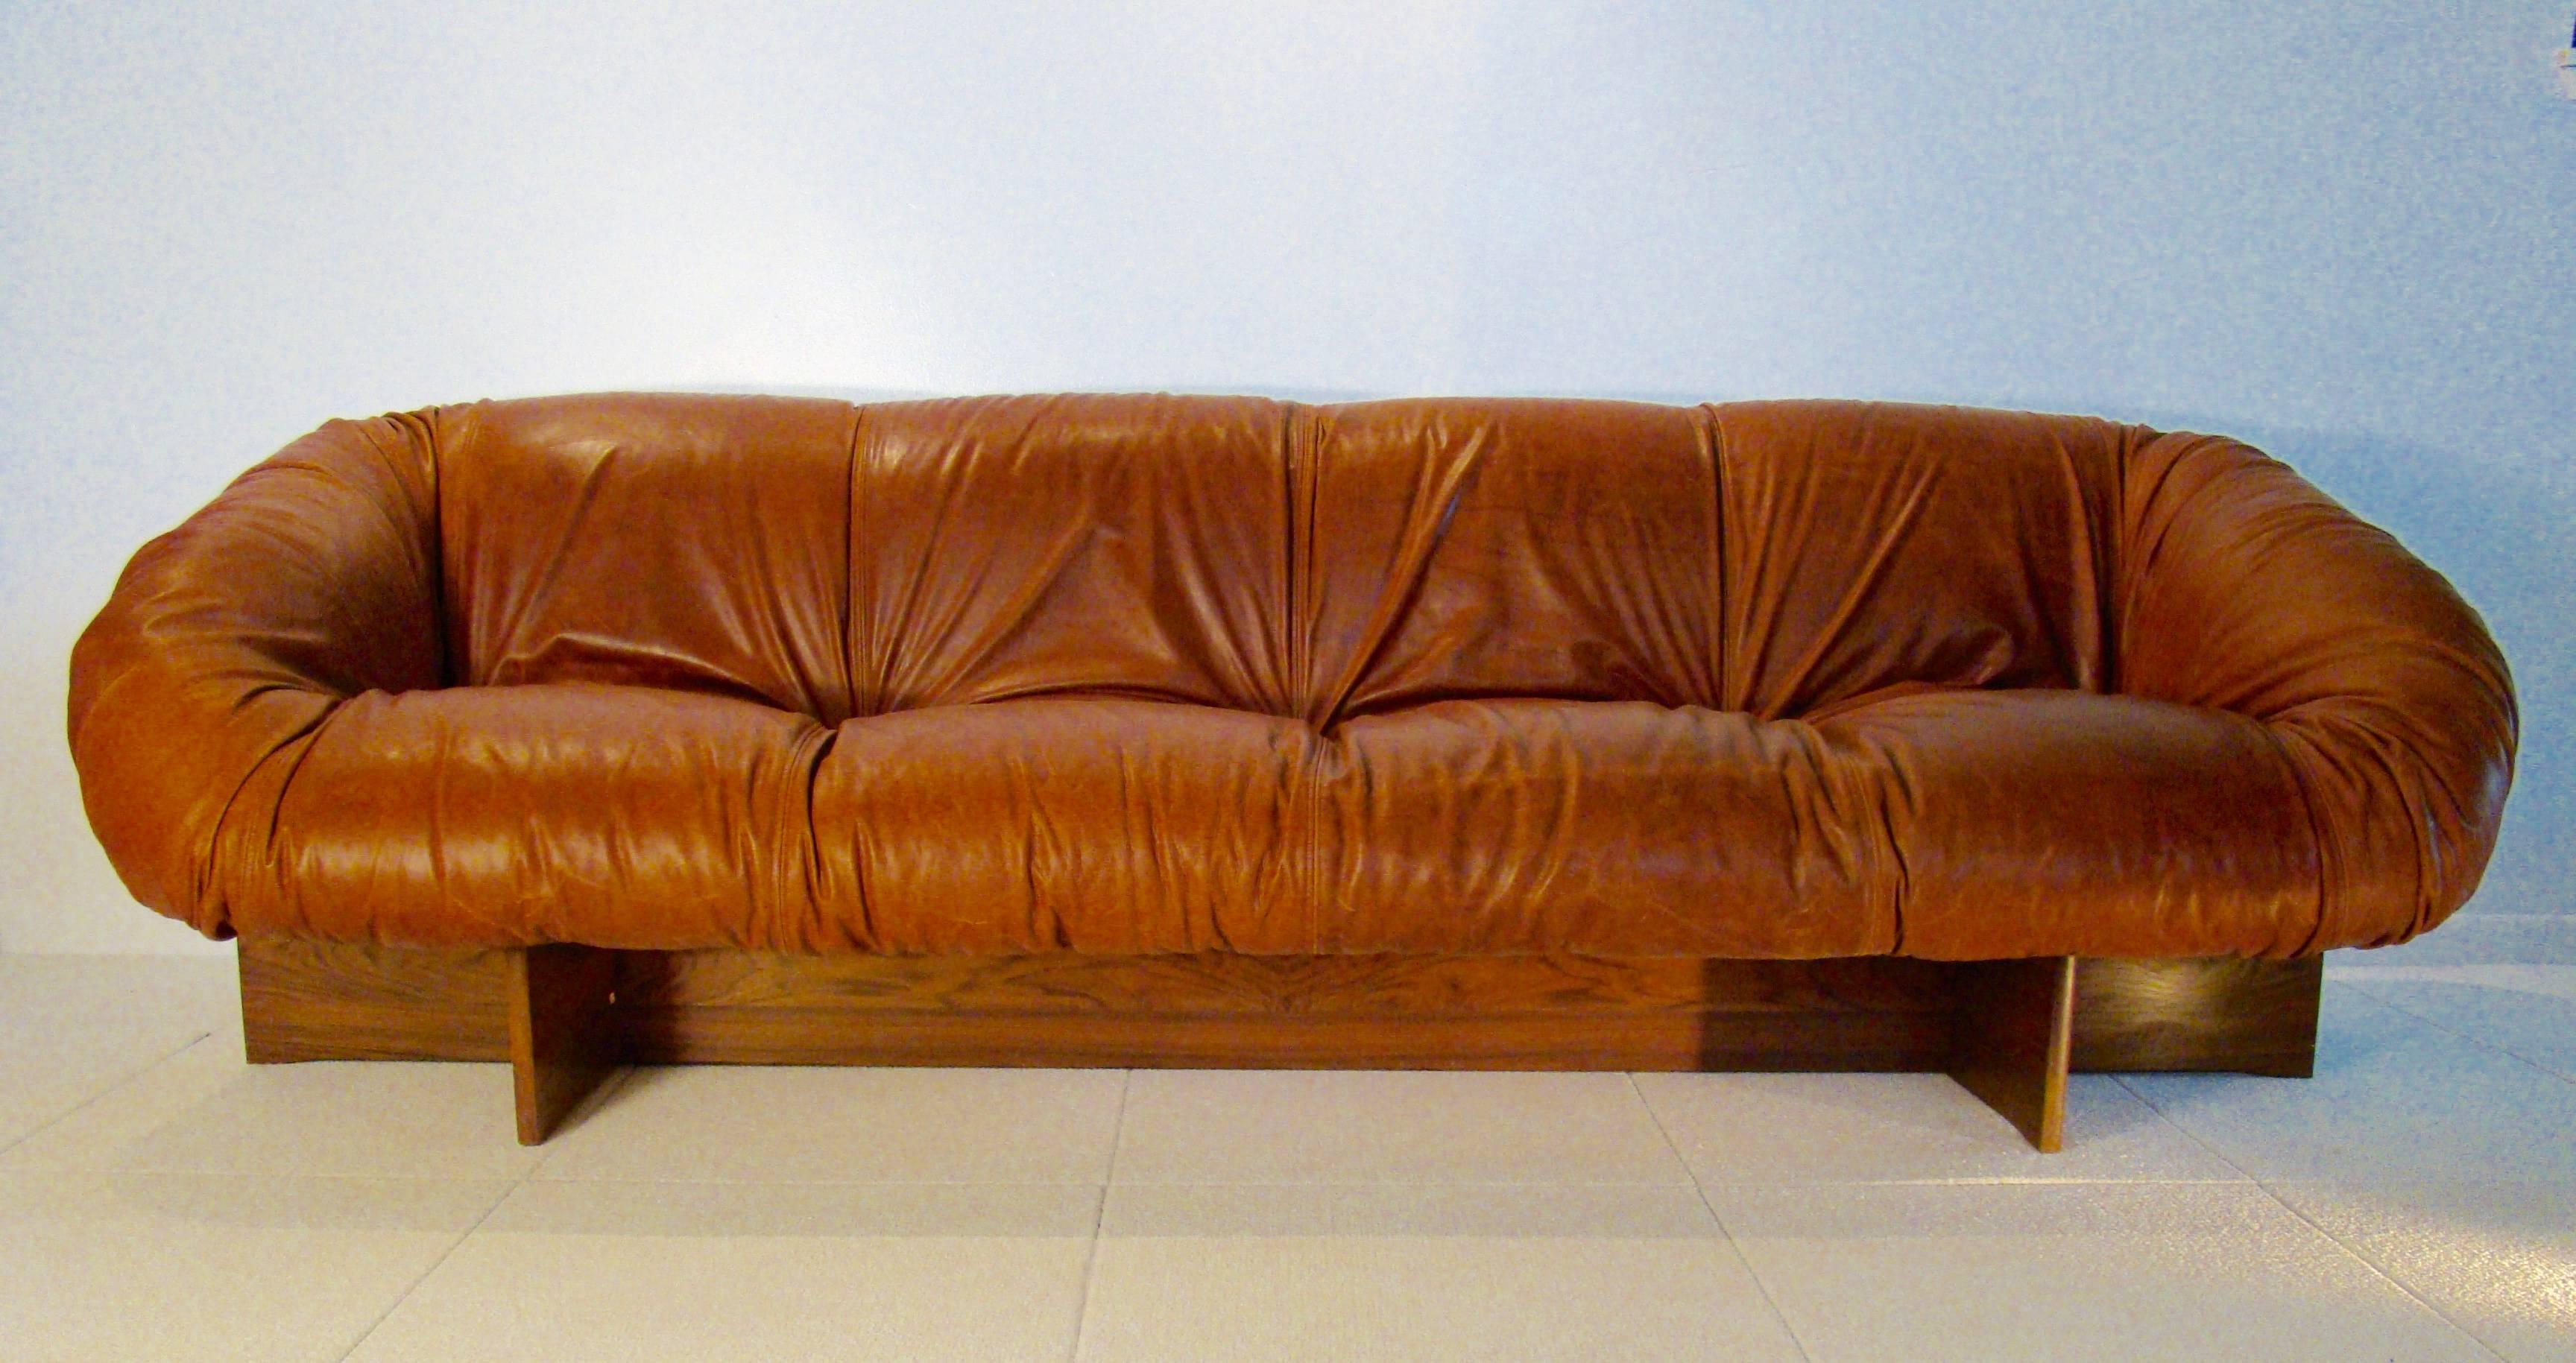 Very uncommon offering, this three-seat sofa contrasts a matte
white fibreglass shell against Percival Lafer's signature rustic leather upholstery cradled in a rosewood plynth base.

Beautiful, amorphic, newer cognac leather upholstery with